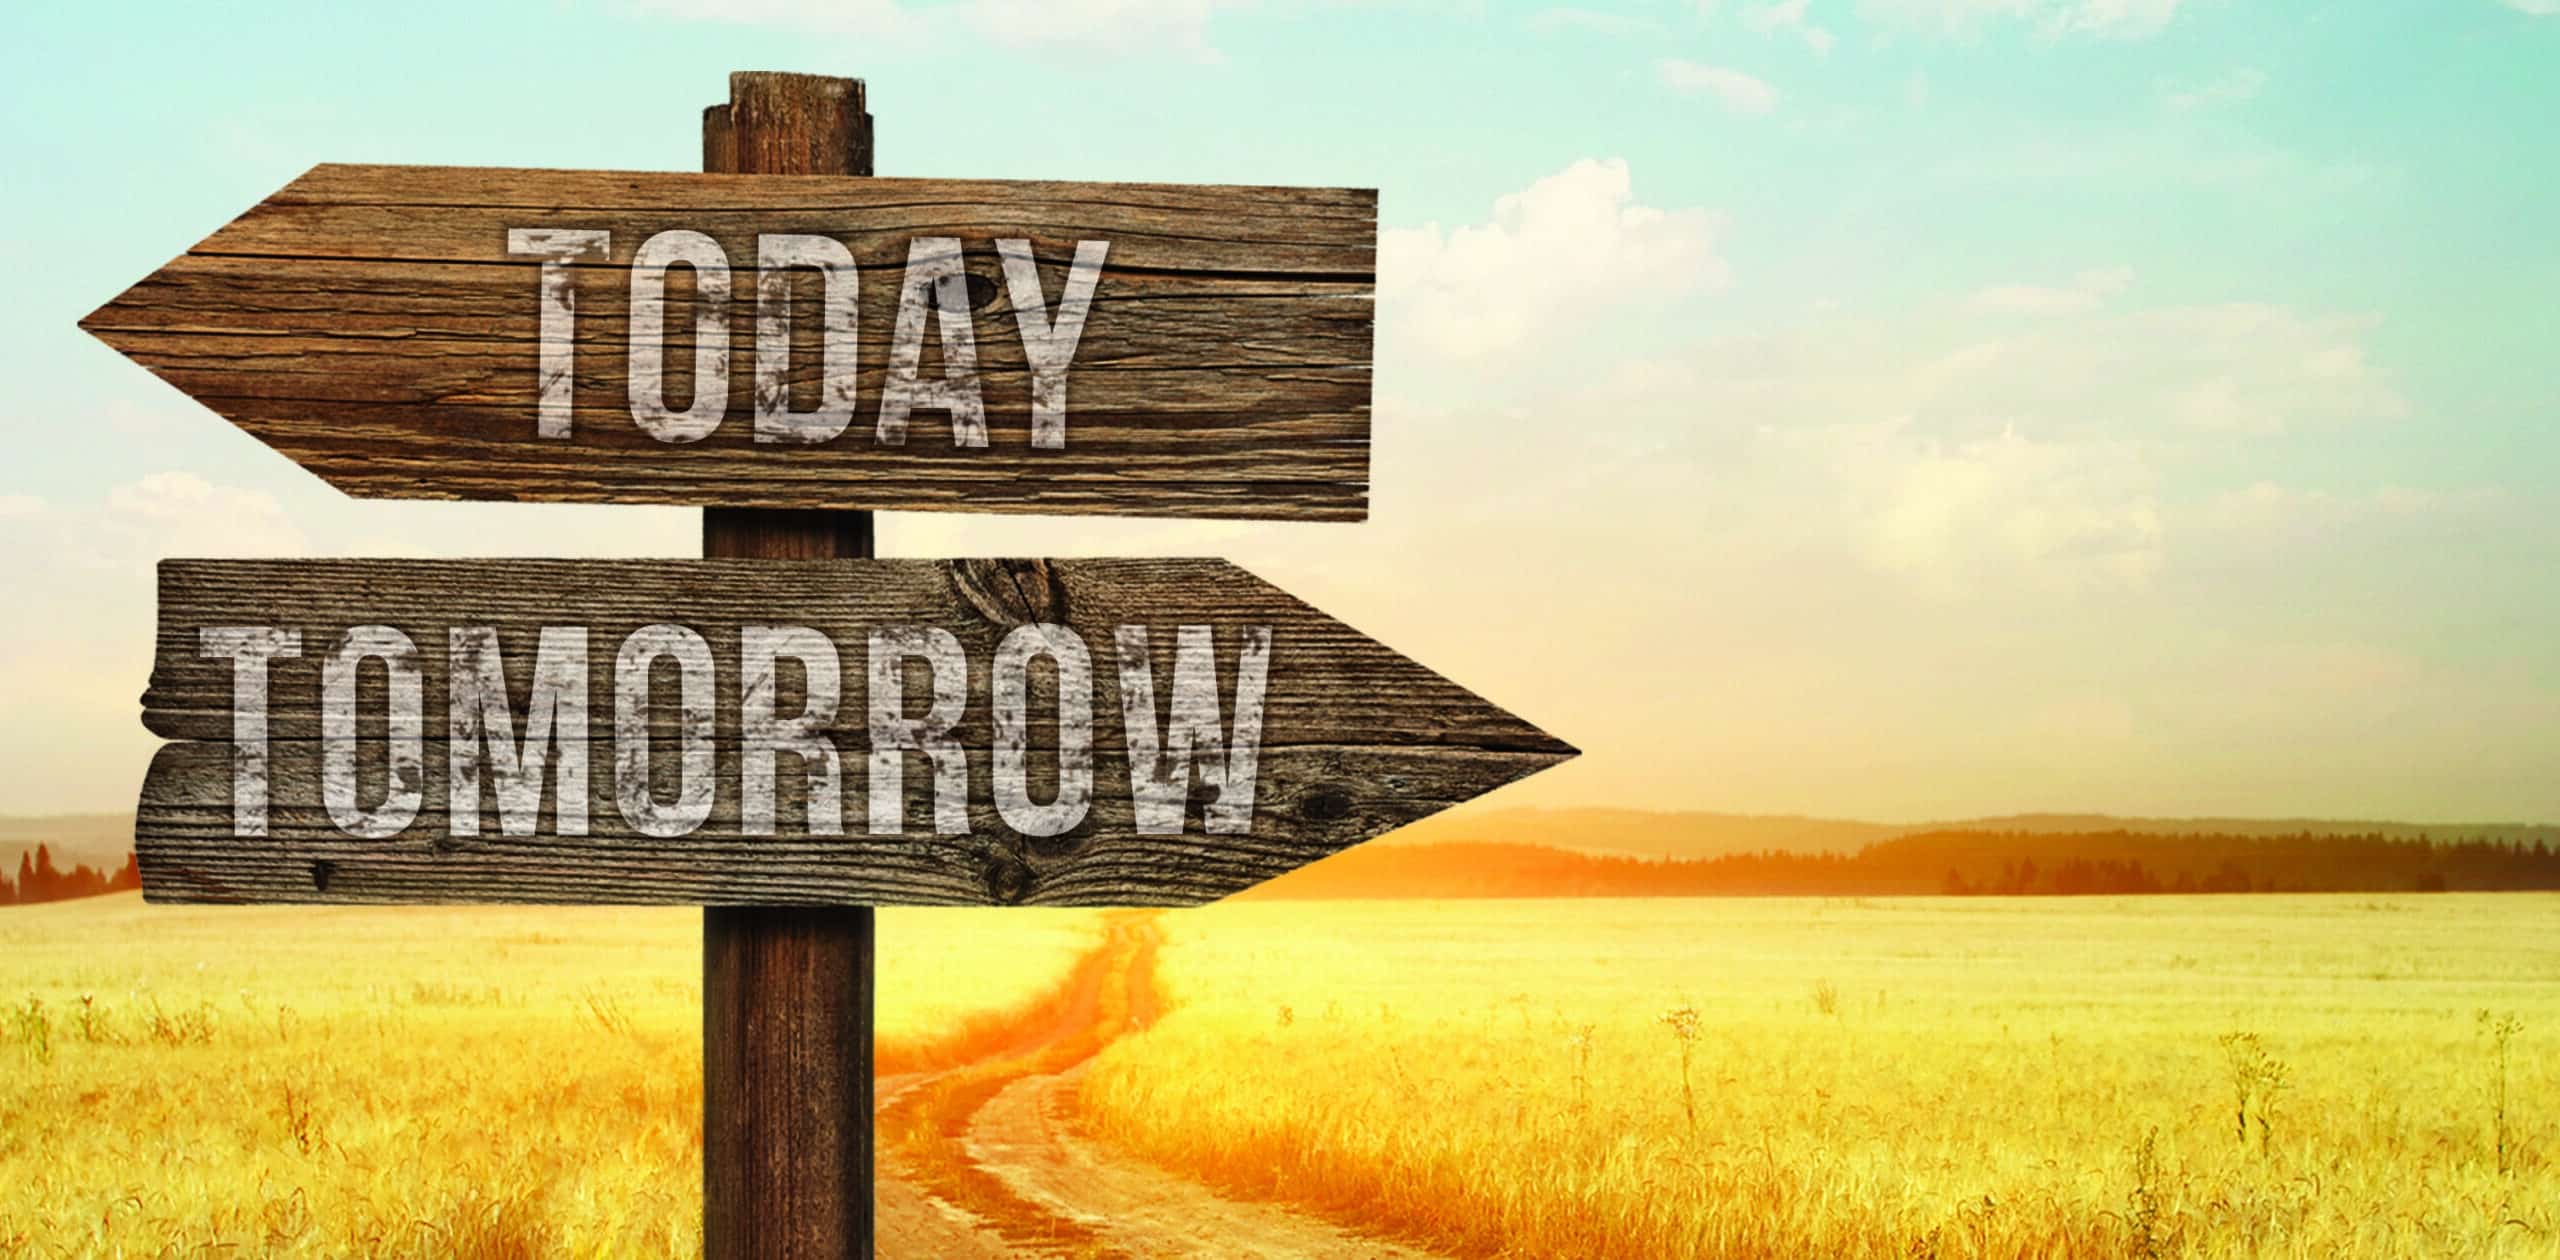 Today-Tomorrow Road signs